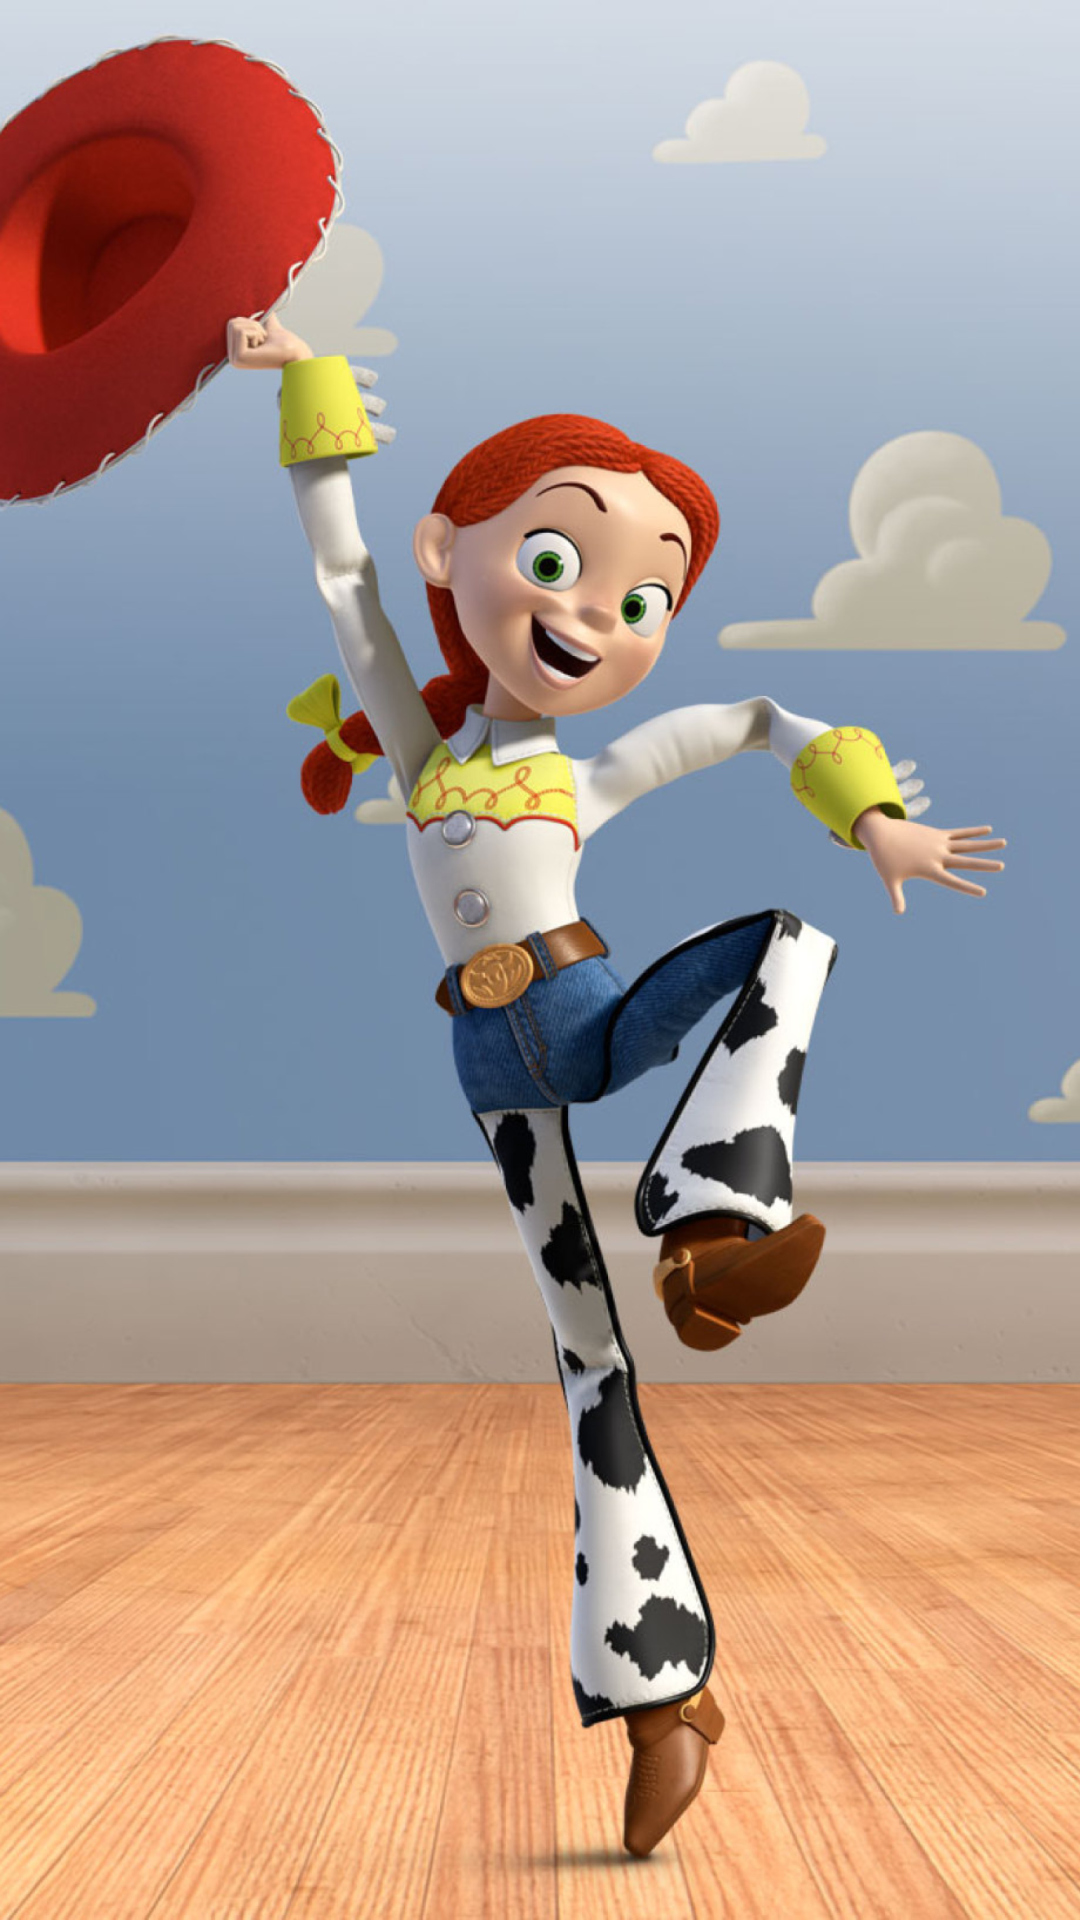 Toy Story 3 wallpaper 1080x1920